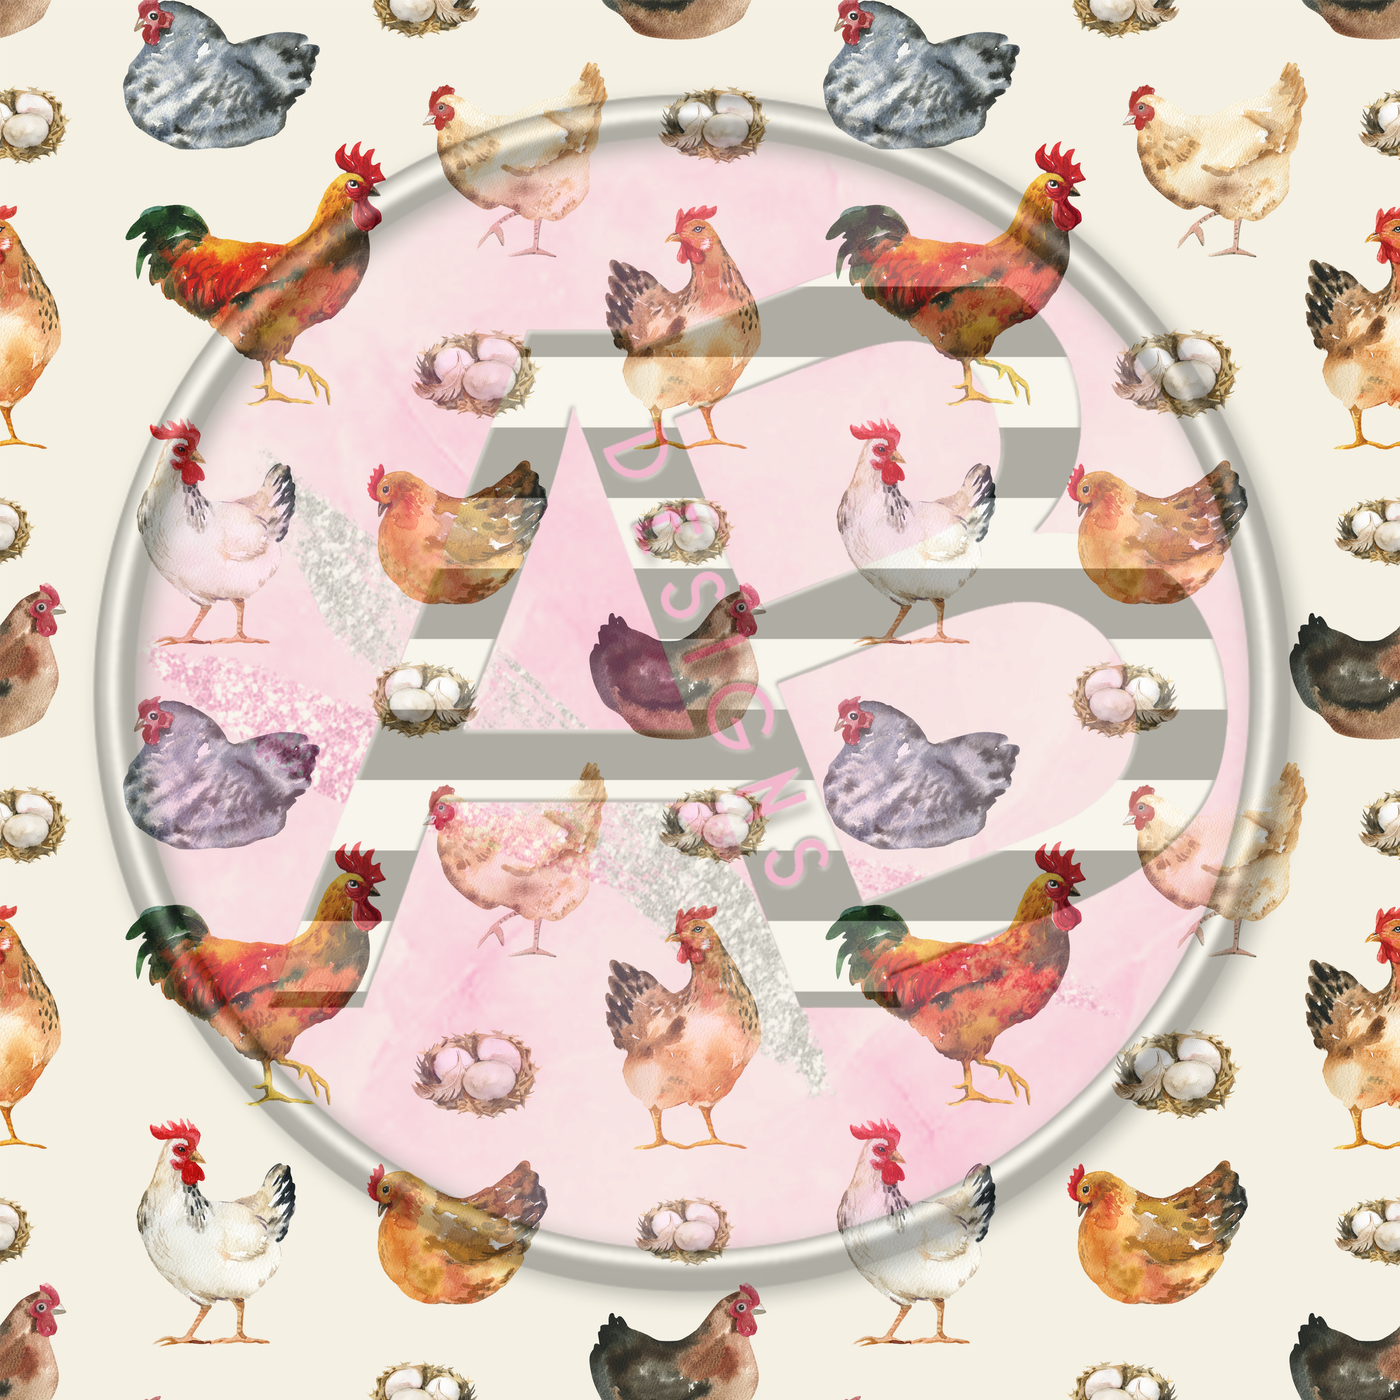 Adhesive Patterned Vinyl - Chickens 1